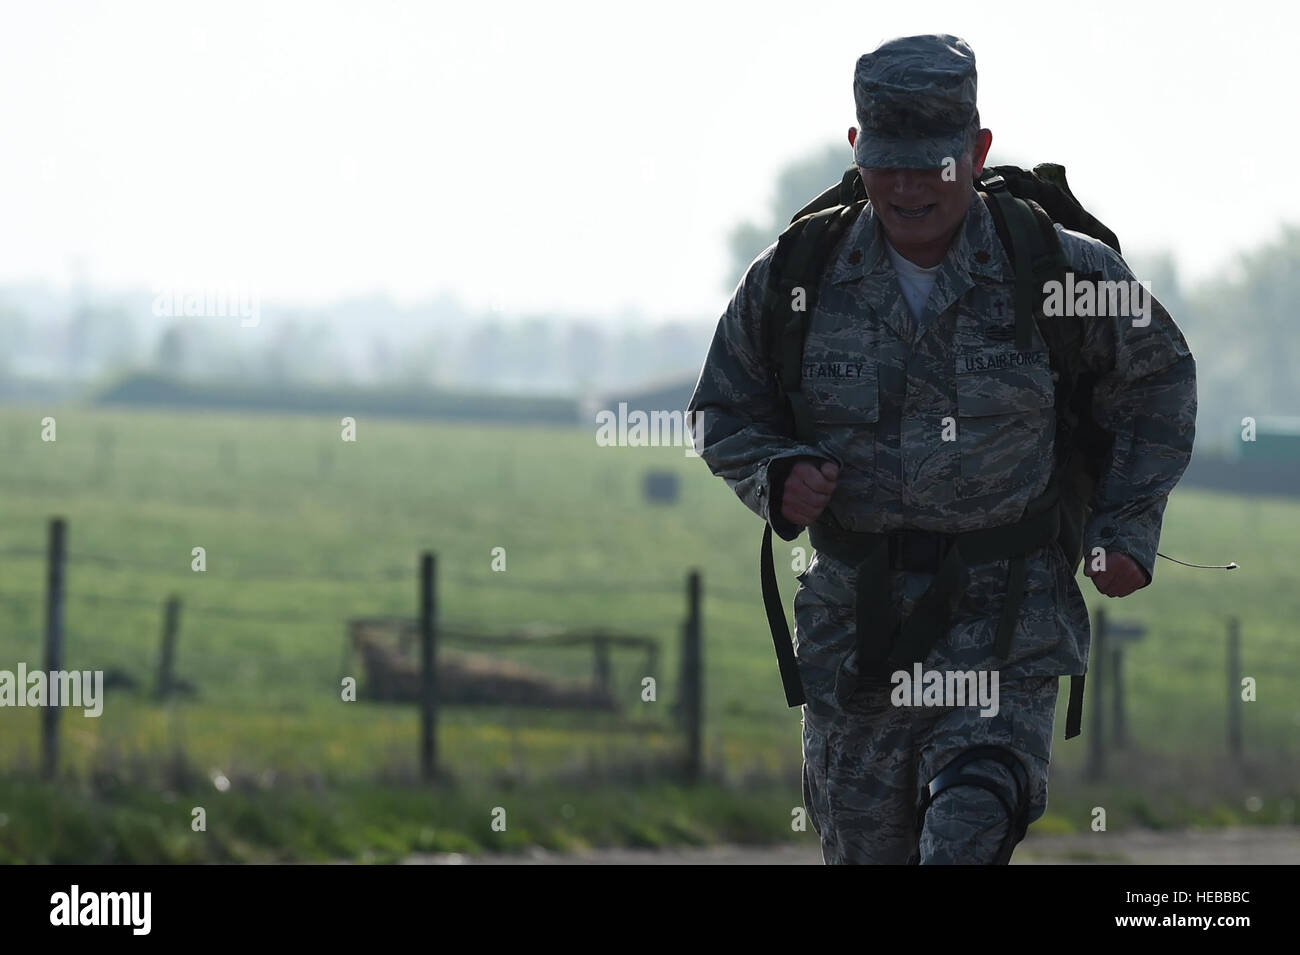 Chaplain (Maj.) Jack Stanley, 422nd Air Base Group chaplain, runs along the perimeter road at RAF Croughton, England, May 11, 2015, during a ruck march in honor of National Police Week. The event was held to honor law enforcement officers who have given their lives in the line of duty.  Staff Sgt. Jarad A. Denton Stock Photo